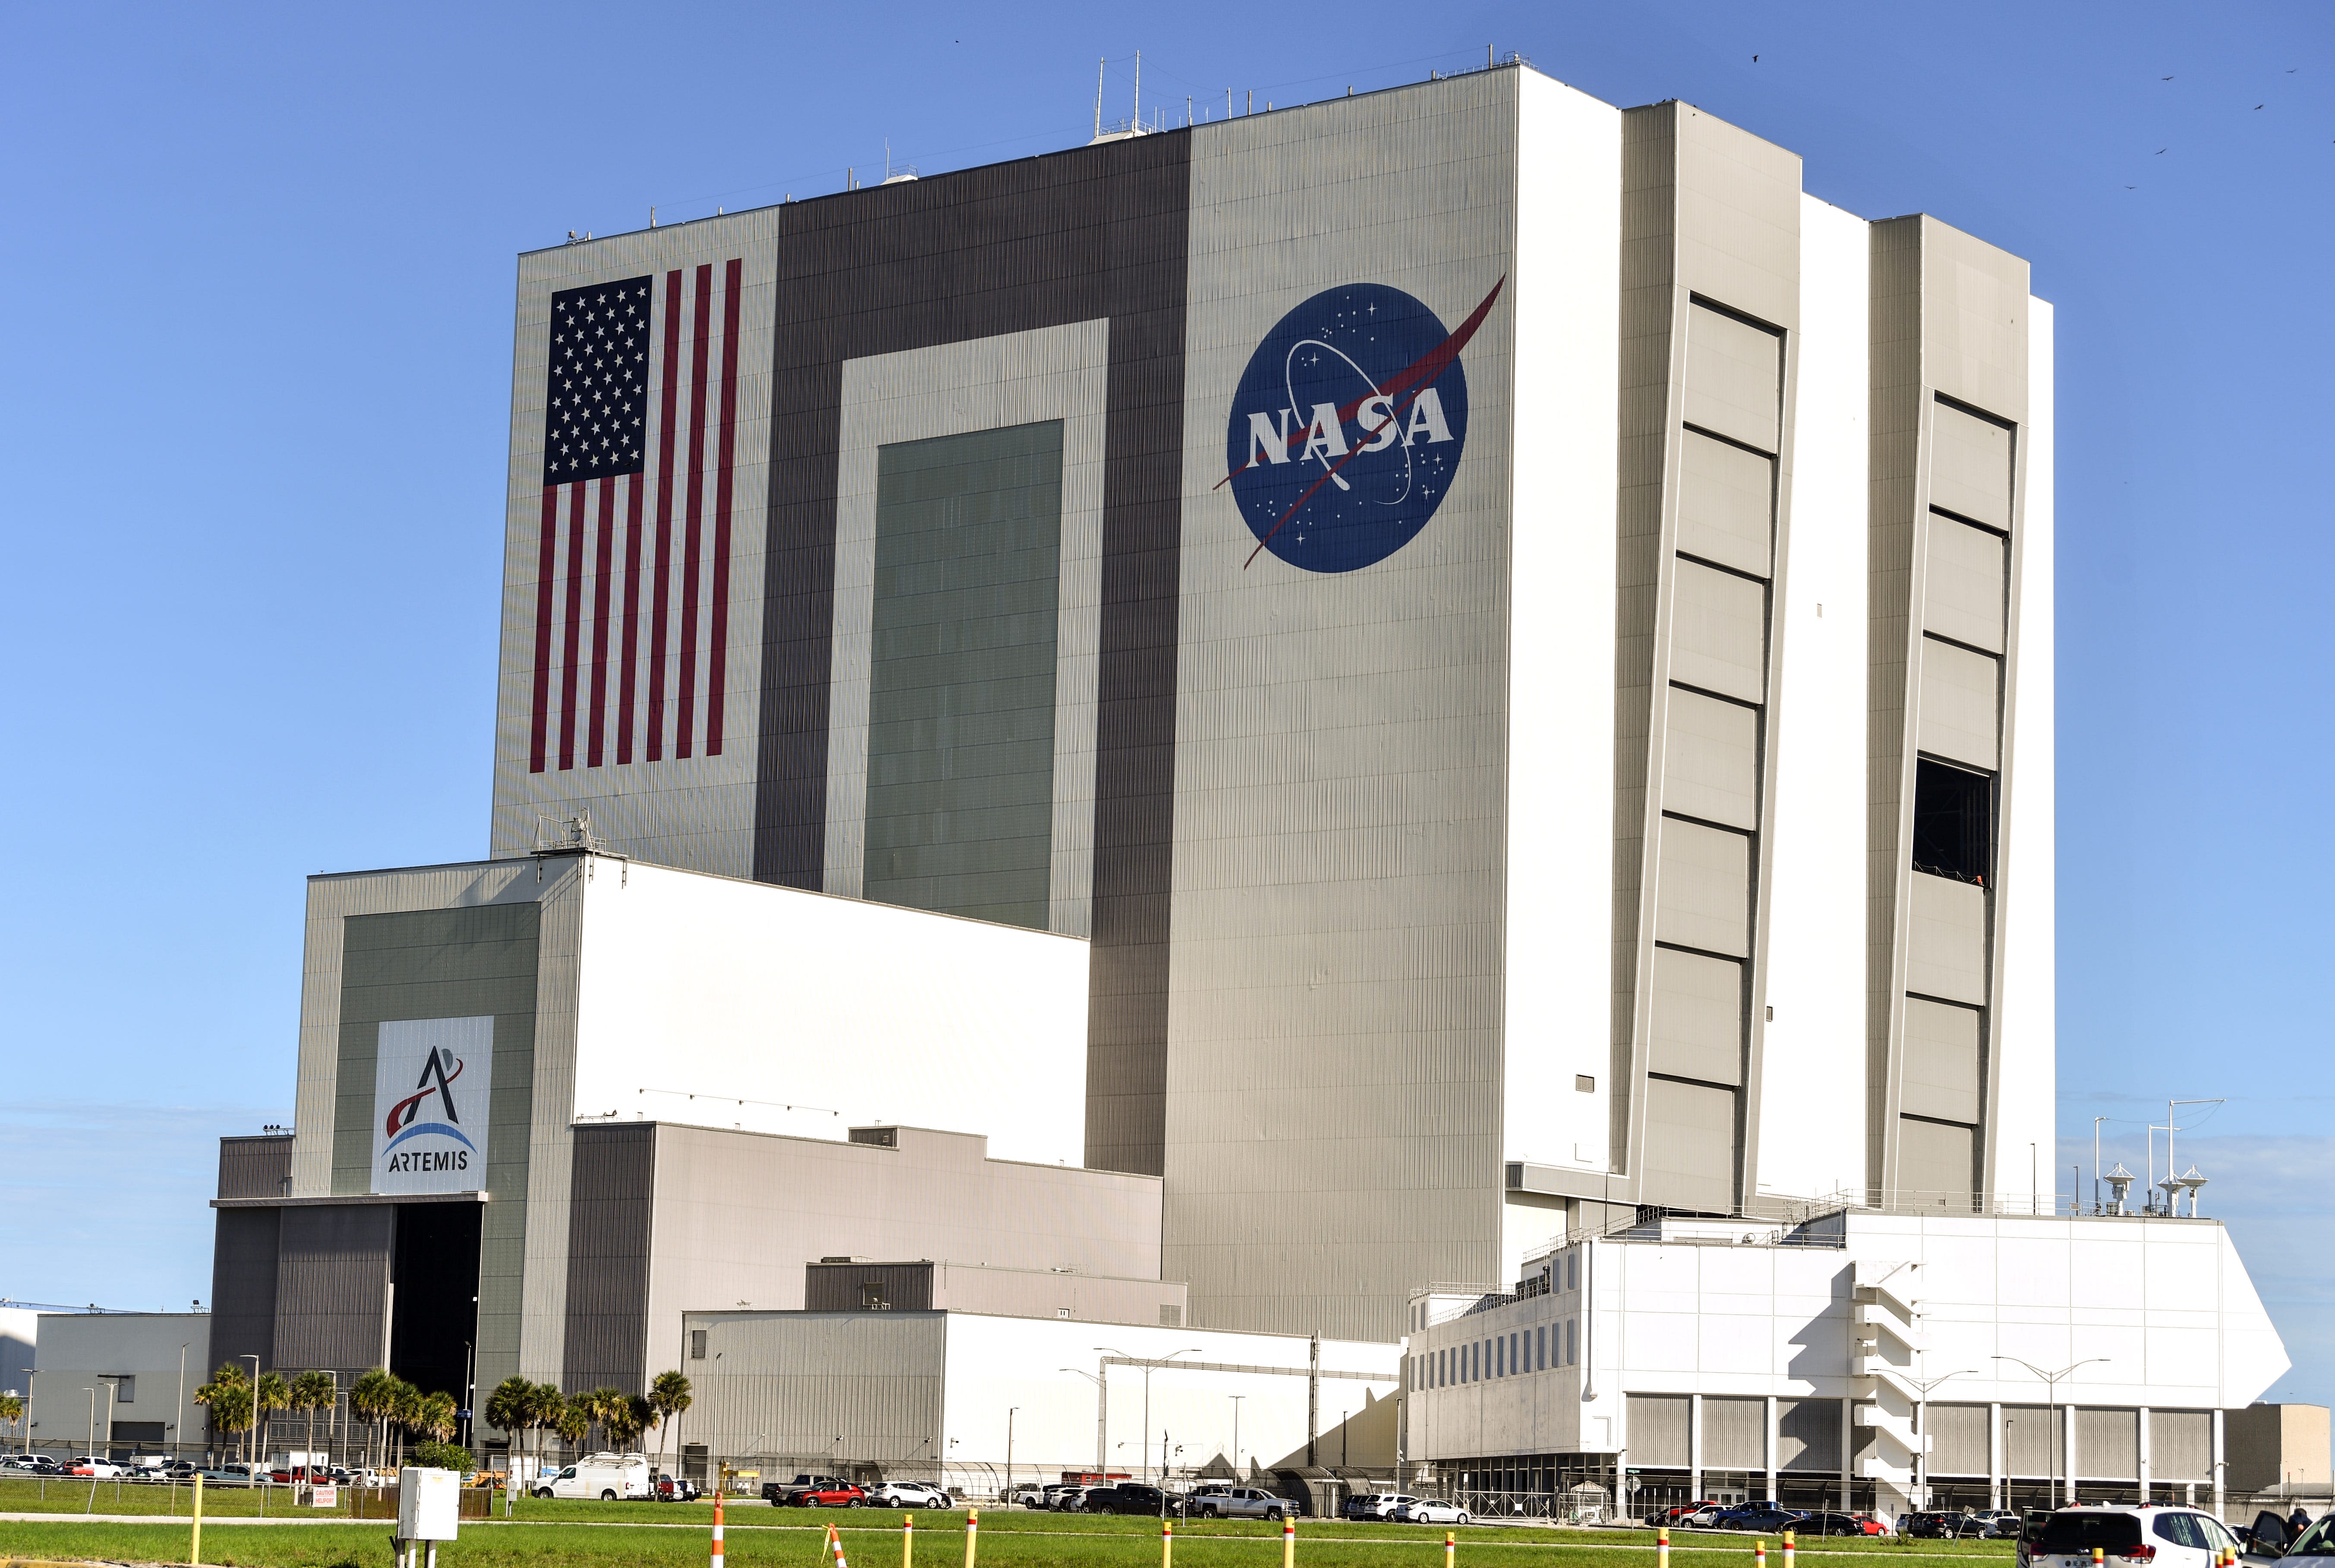 55 years after Apollo 11 moon landing, NASA still stacks space future in VAB